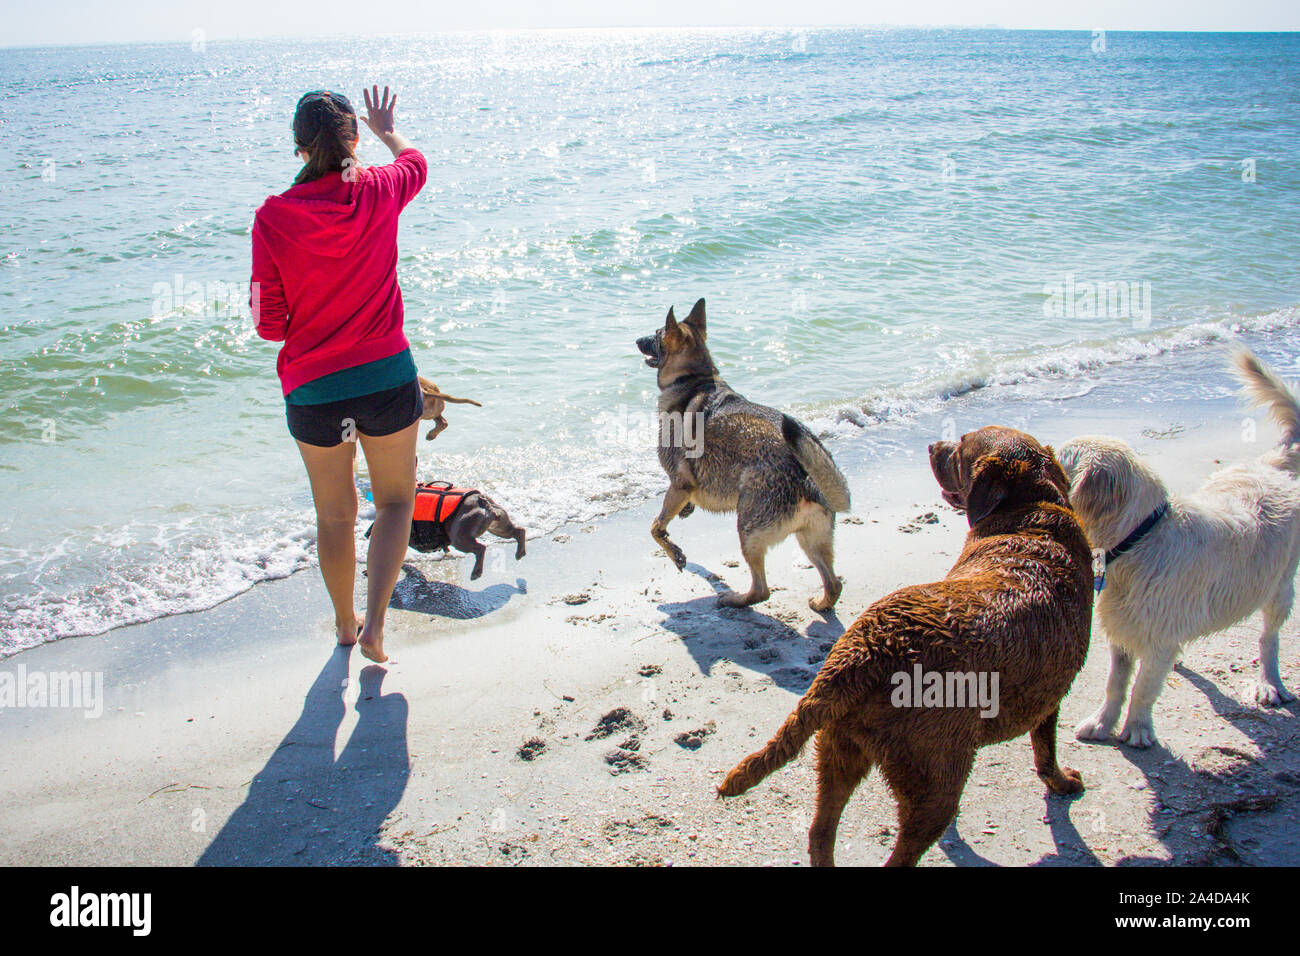 Woman playing with five dogs on beach, United States Stock Photo